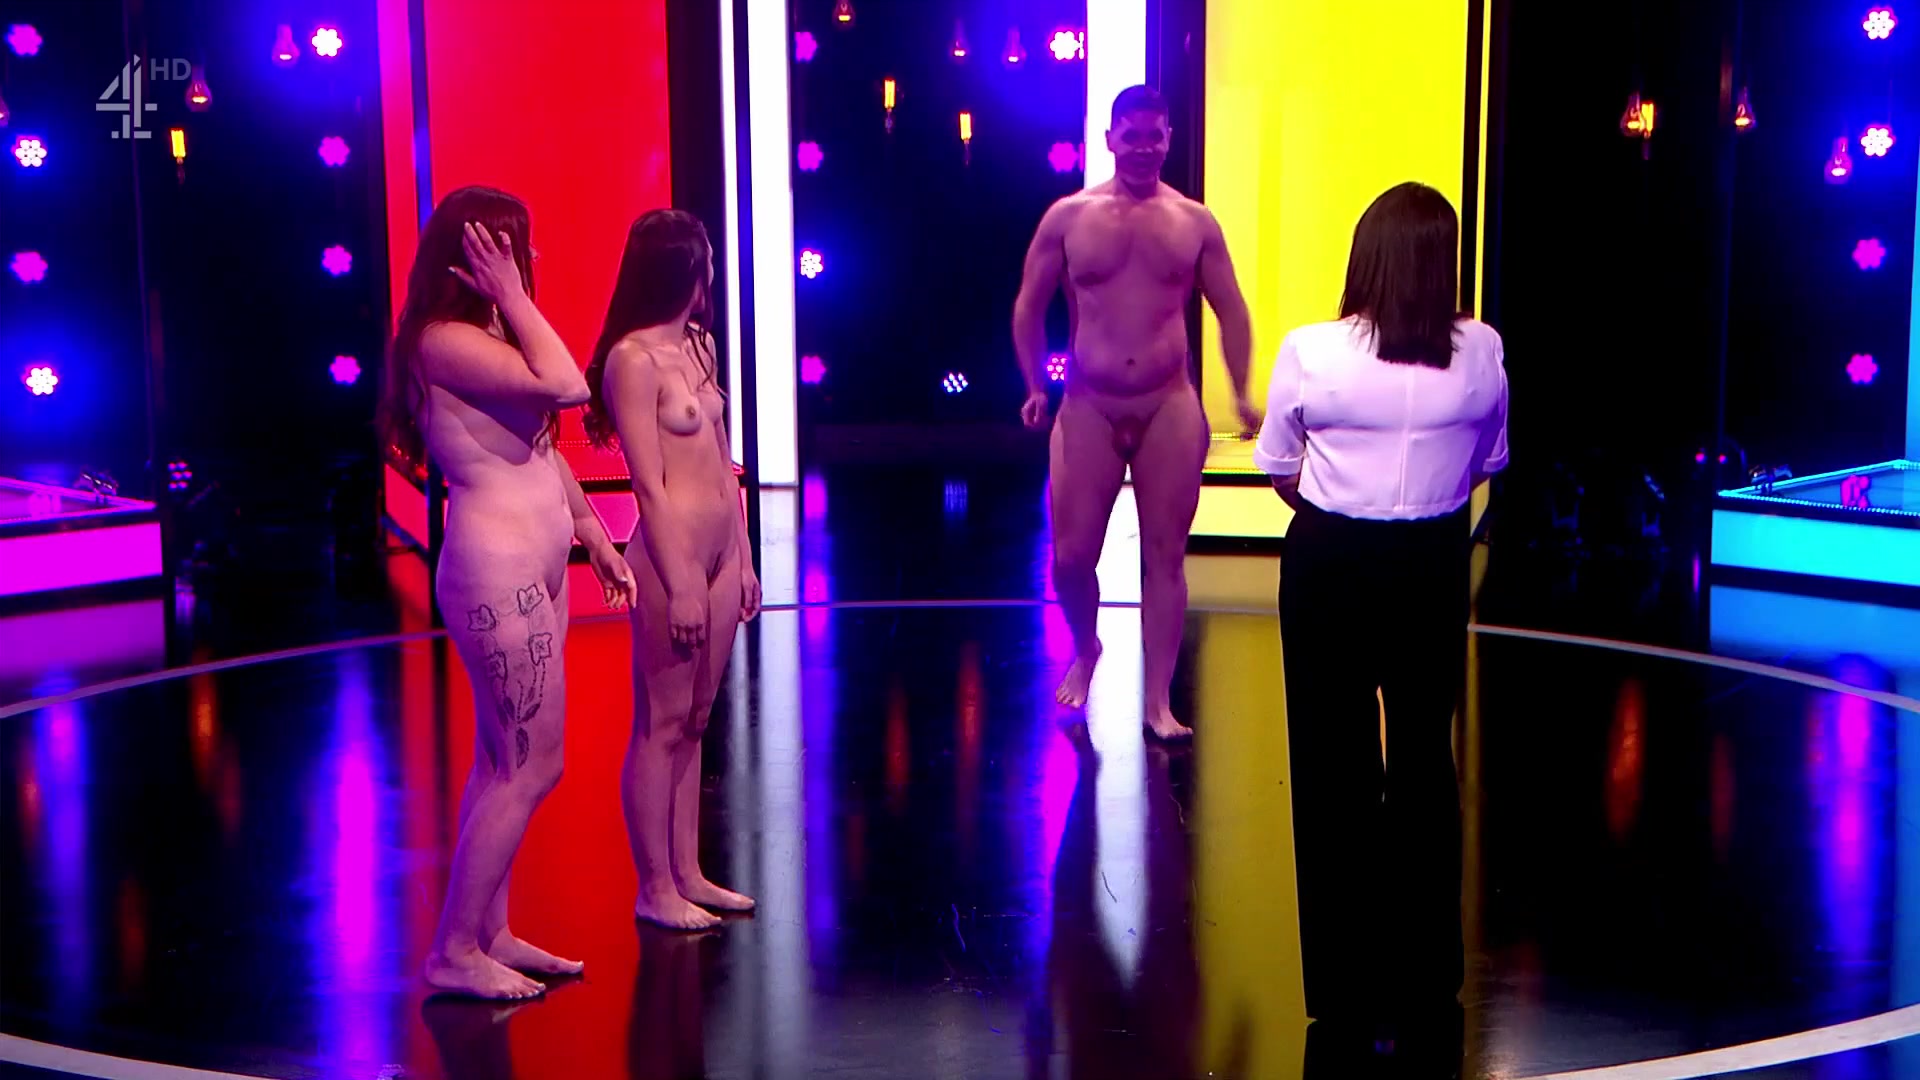 TV UK SHOW WITH BOY AND GIRL NAKED